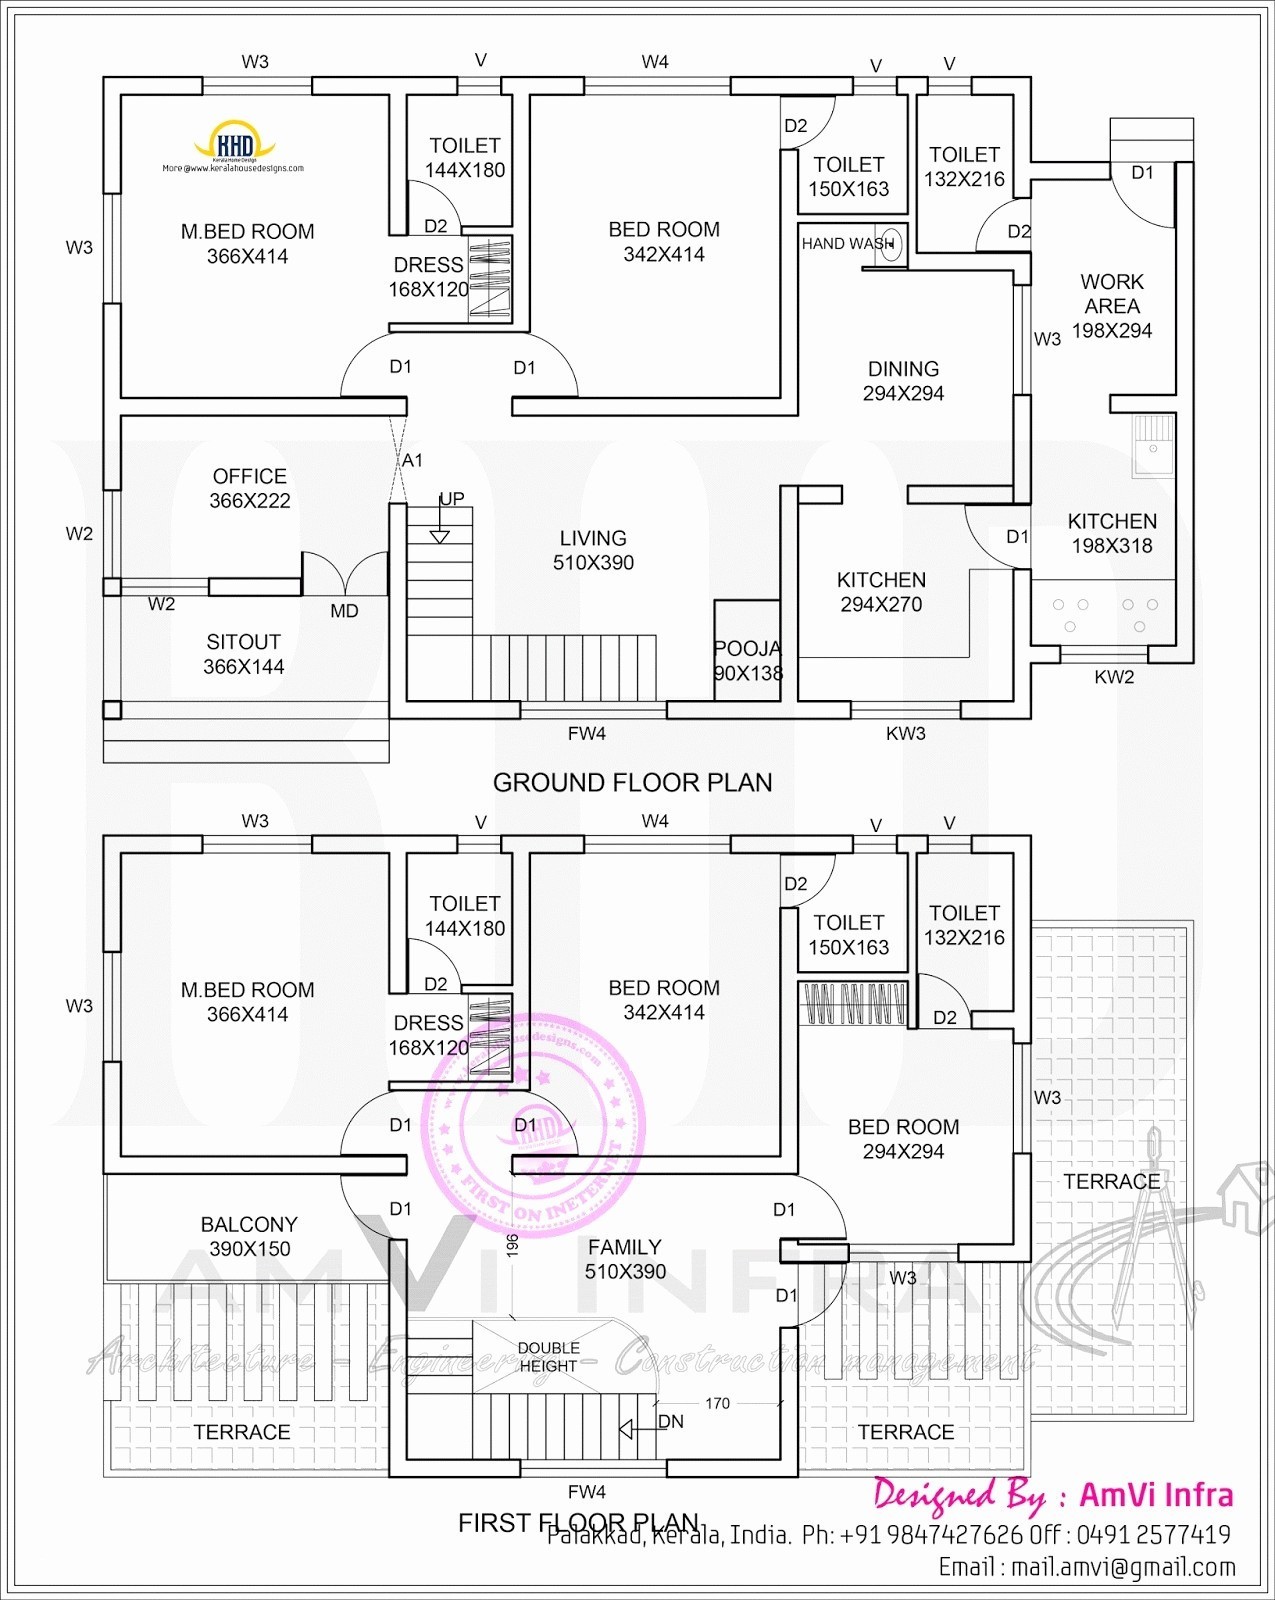 wiring diagram in room new diagram a awesome diagram websites unique hvac diagram 0d wire of wiring diagram in room